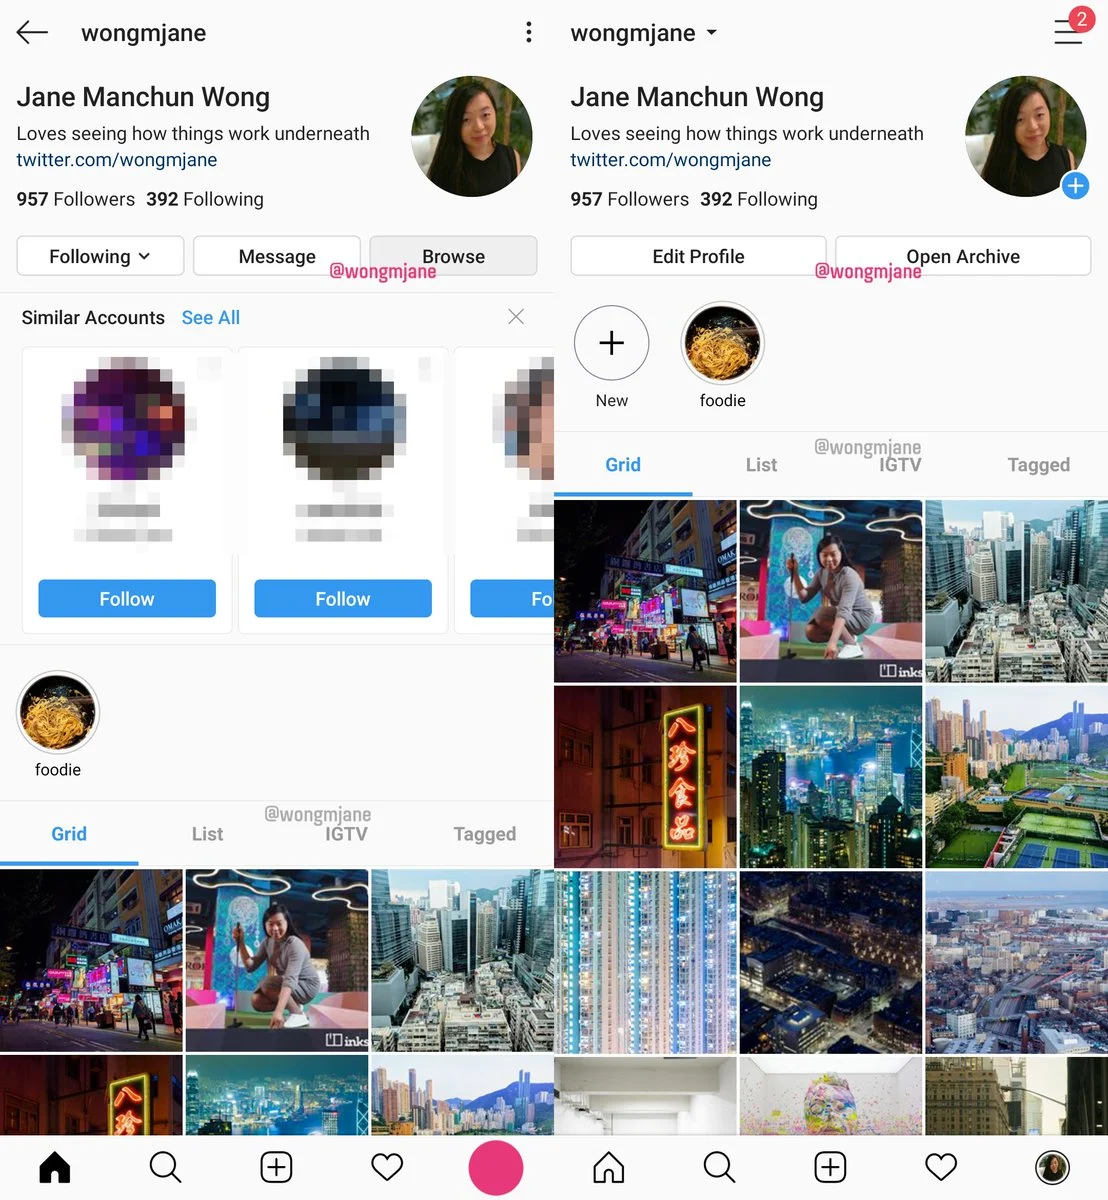 Instagram is testing a few shortcut buttons in the new profile UI: